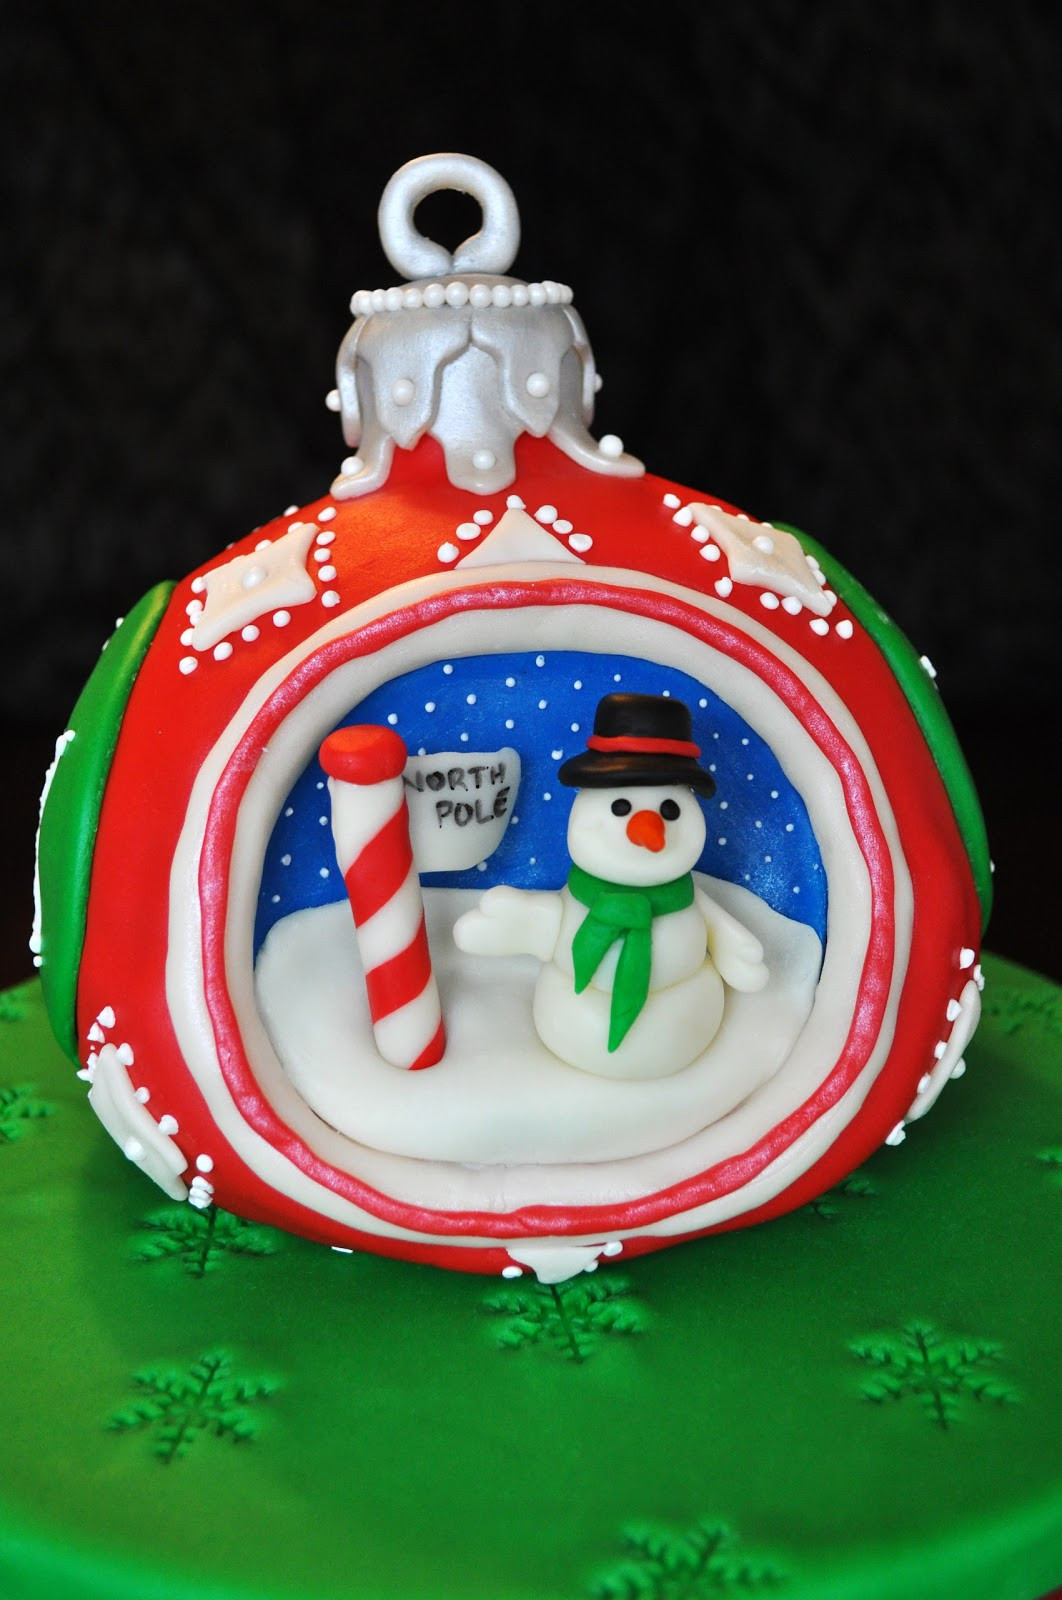 Christmas Ornaments Cakes
 Life s Sweet Occasions Christmas Ornament Cake